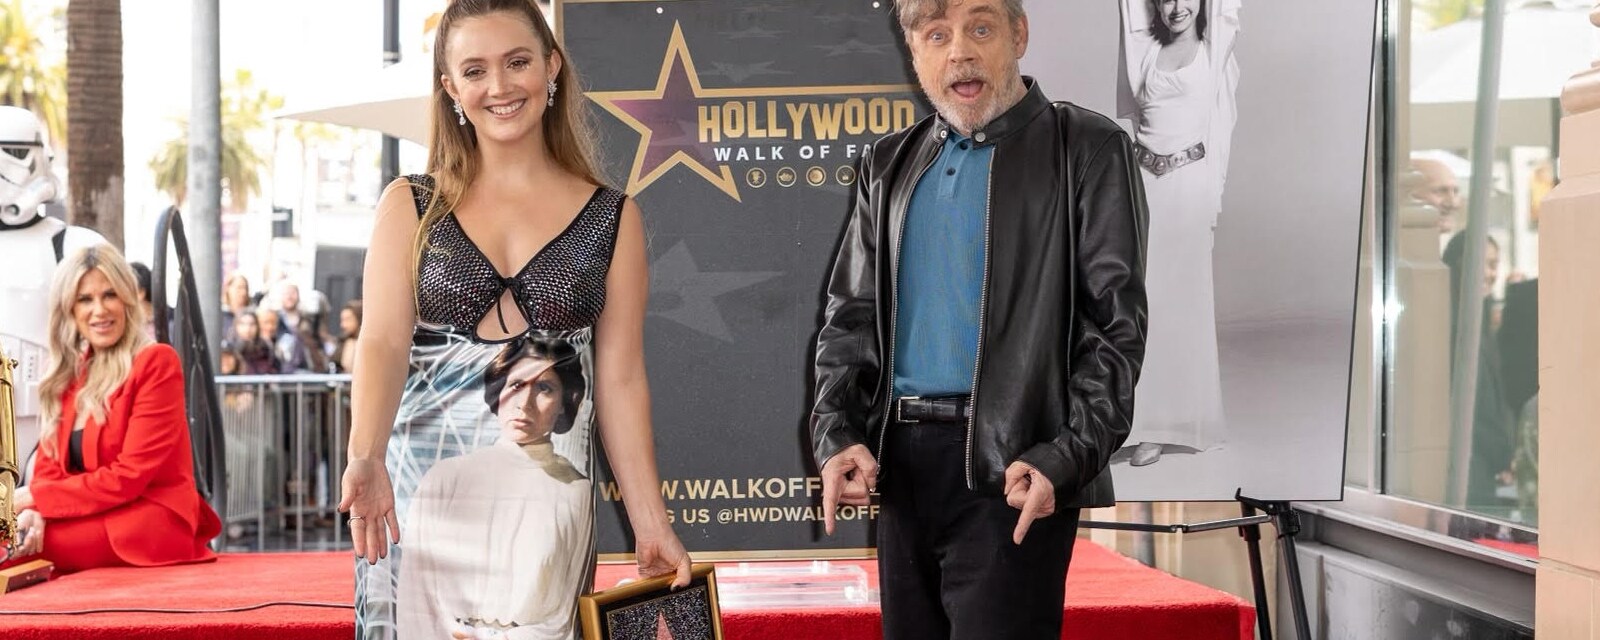 this-star-wars-day-carrie-fisher-honored-with-star-on-hollywood-walk-of-fame